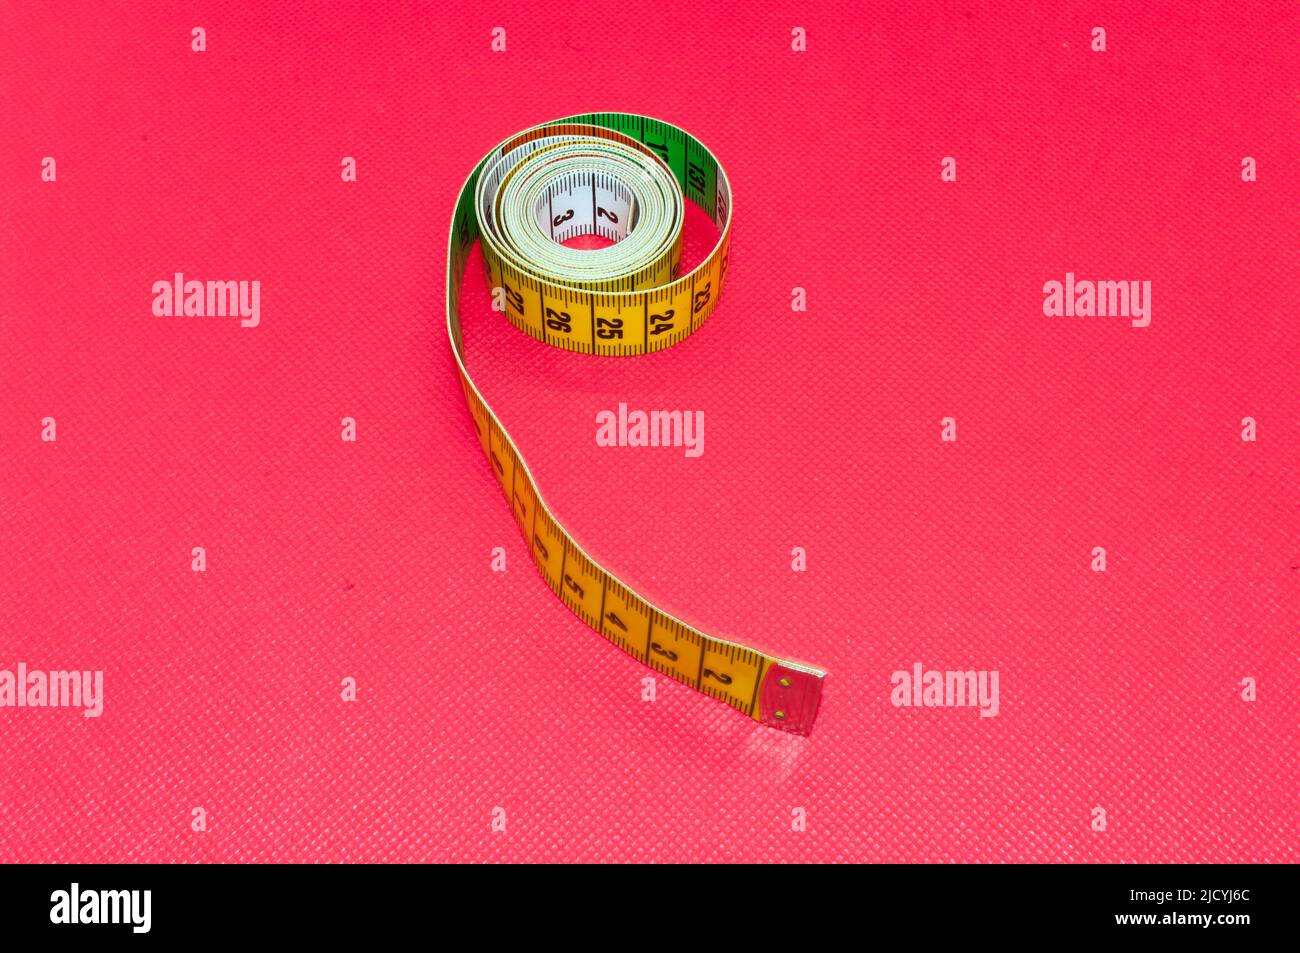 https://c8.alamy.com/comp/2JCYJ6C/iconic-picture-measure-flexible-tailors-tape-measure-isolated-against-red-background-2JCYJ6C.jpg